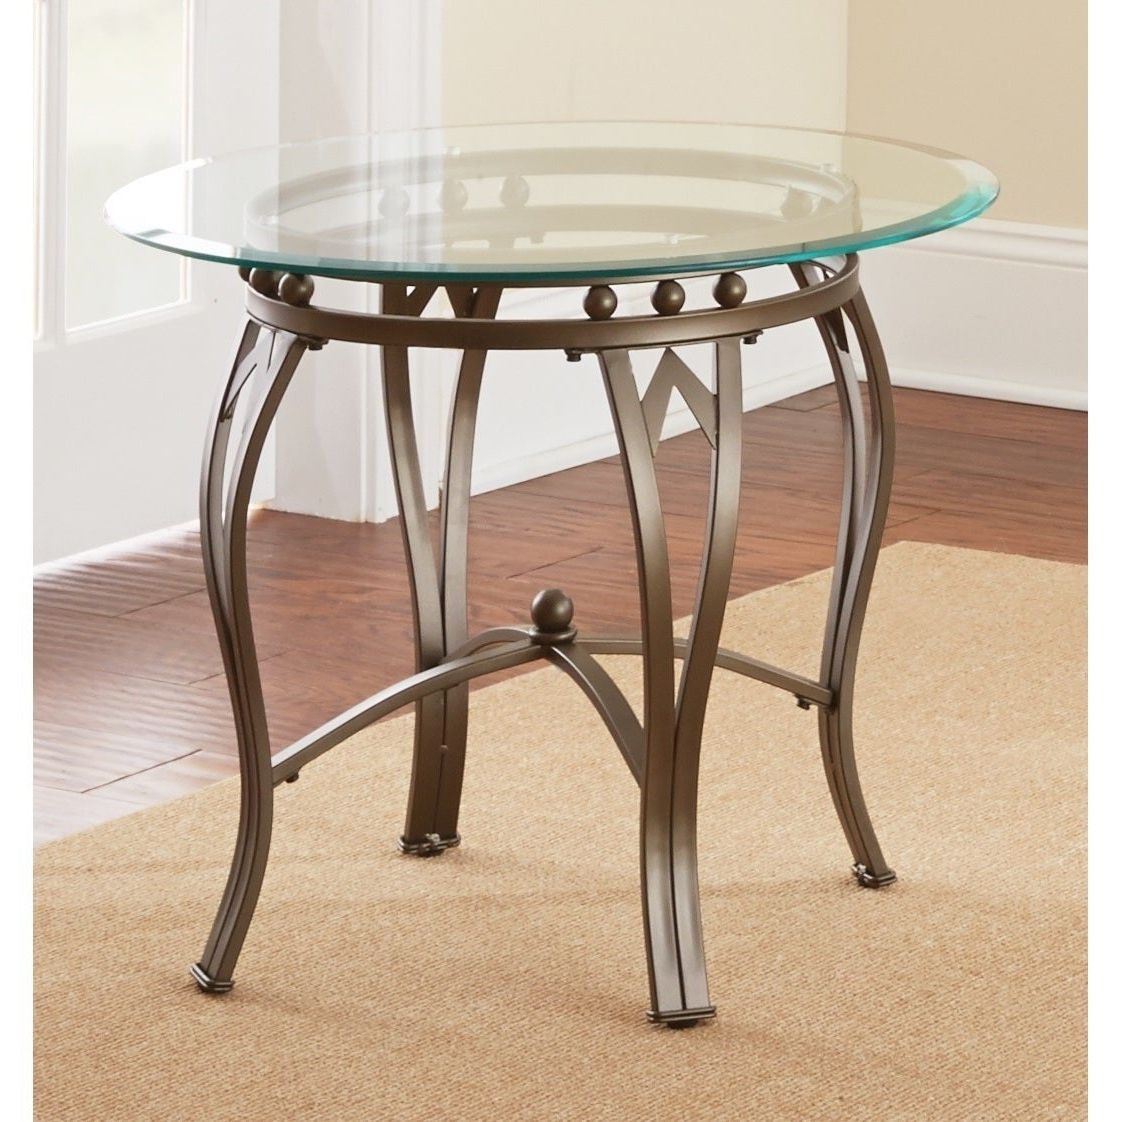 Widely Used Copper Grove Rochon Glass Top Wood Accent Tables Intended For Buy Round Copper Grove Coffee, Console, Sofa & End Tables (View 17 of 20)